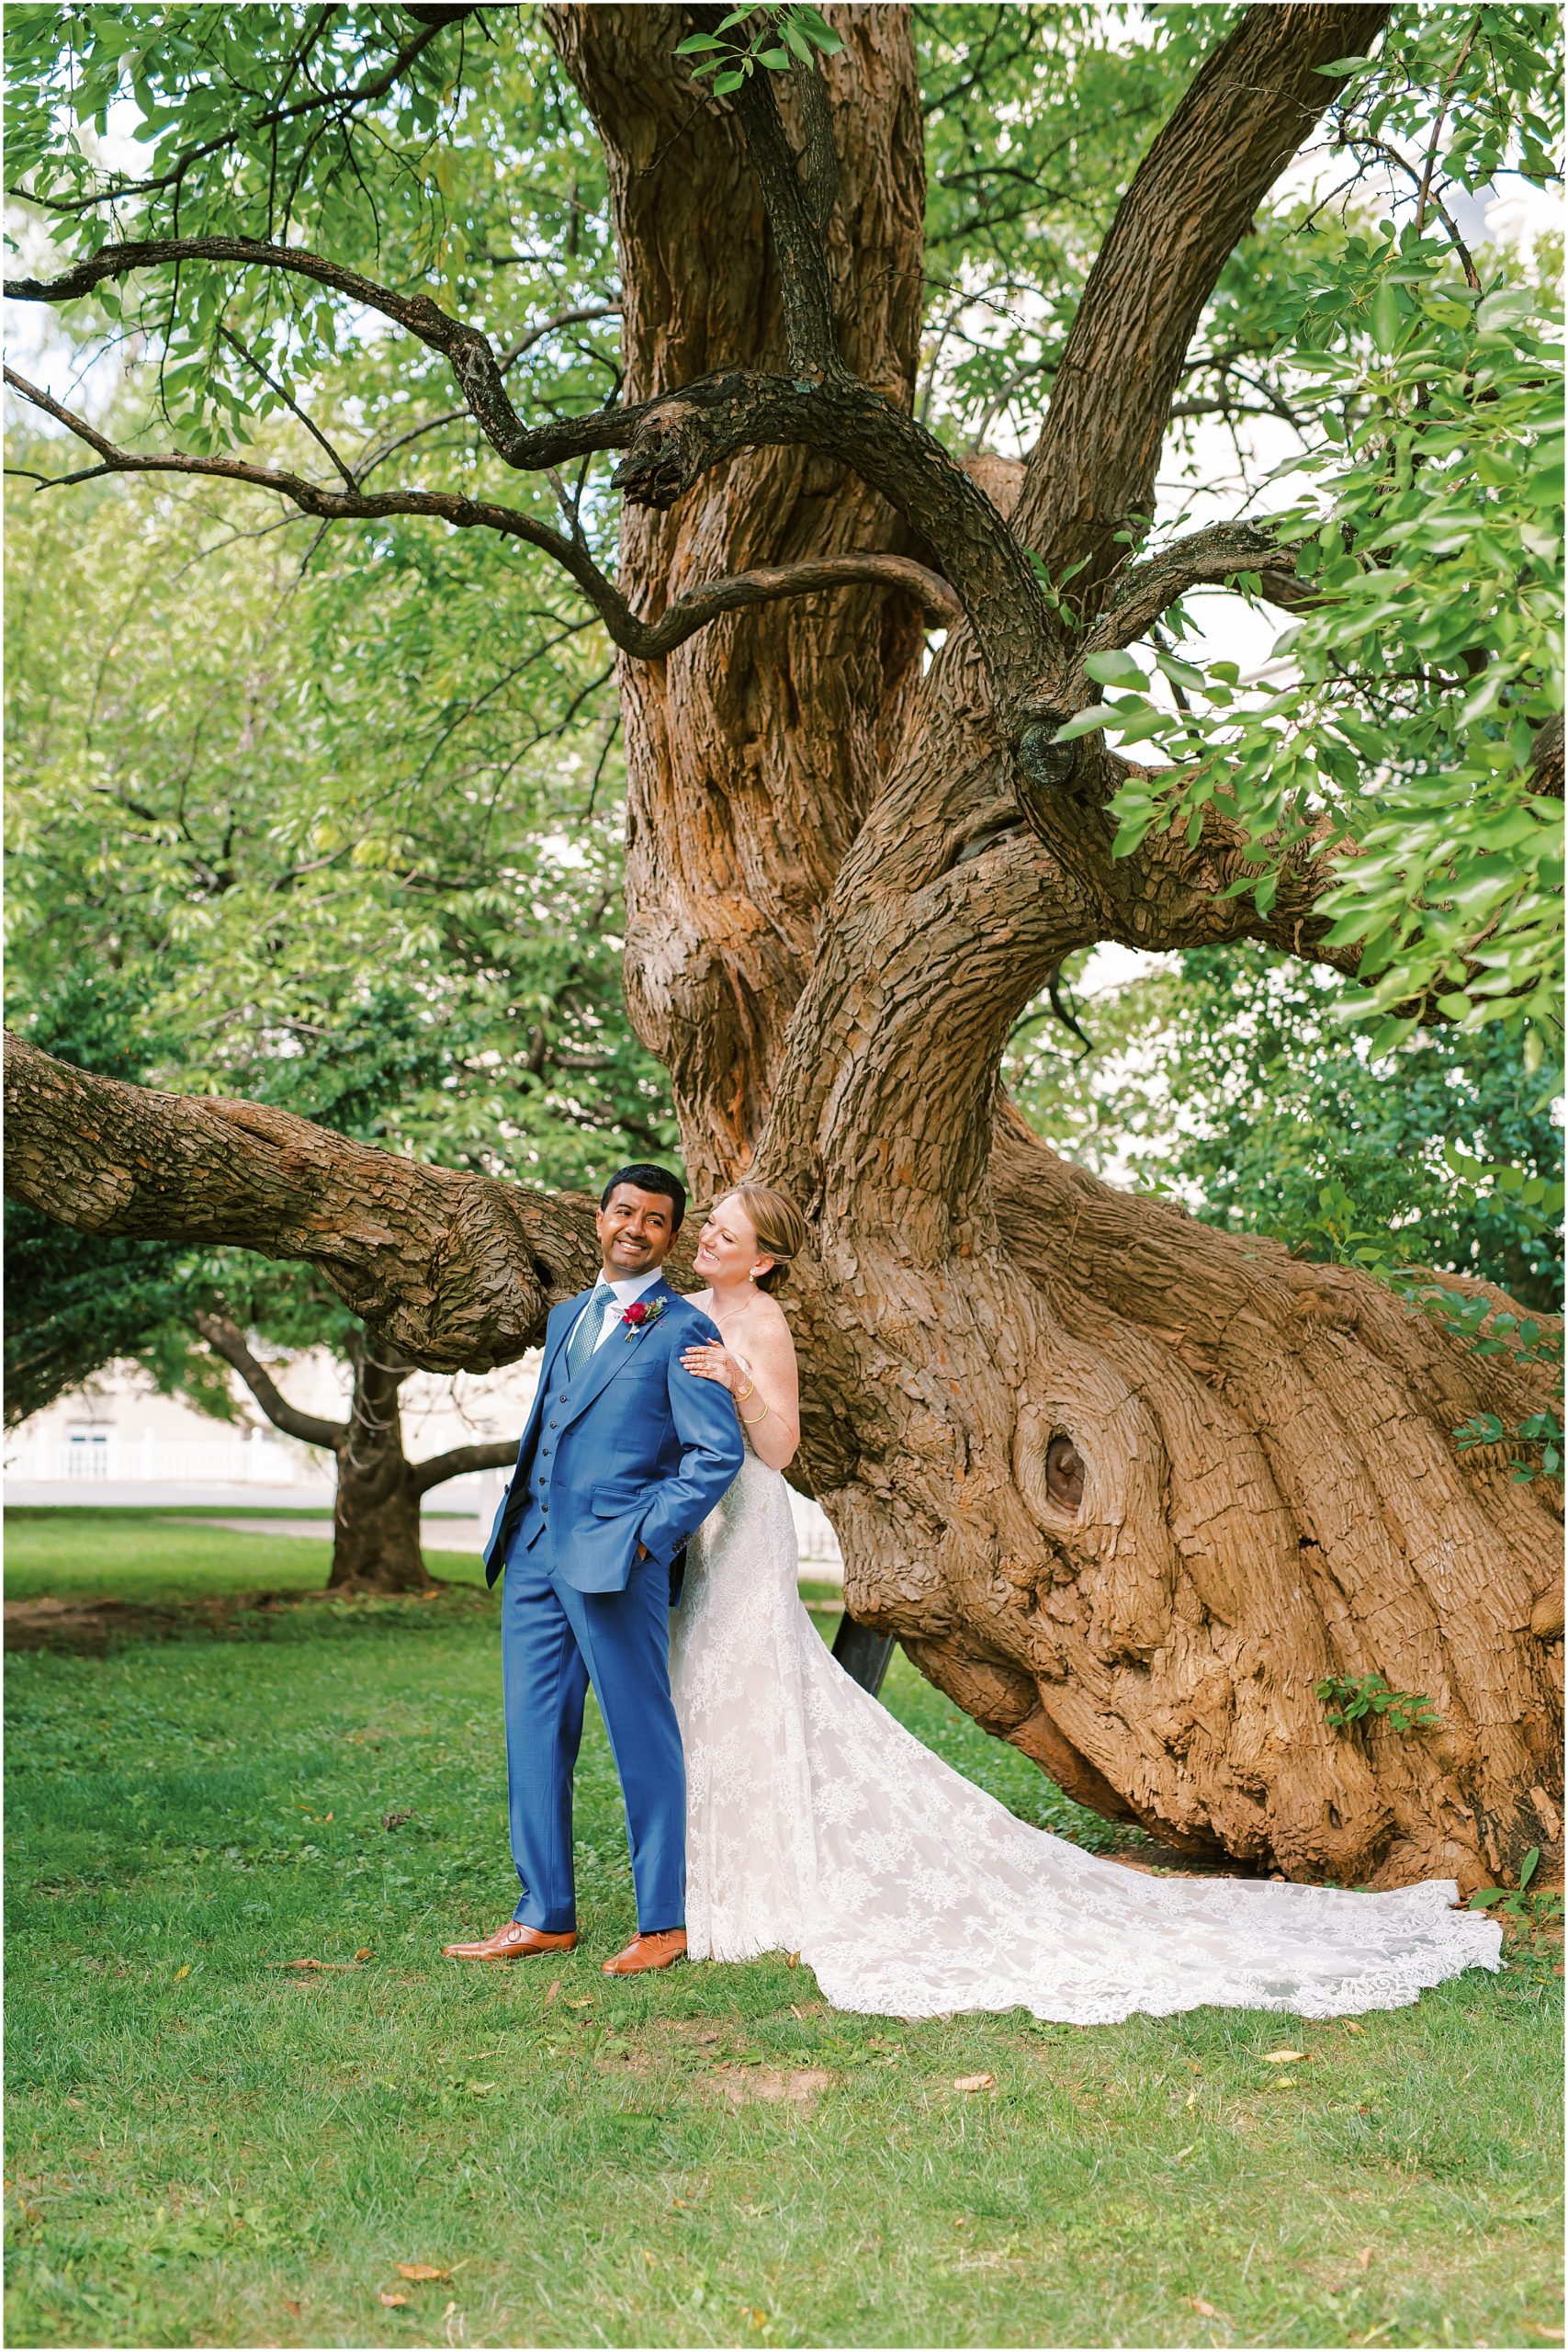 Bride and groom portrait in front of tree at President Lincoln's Cottage